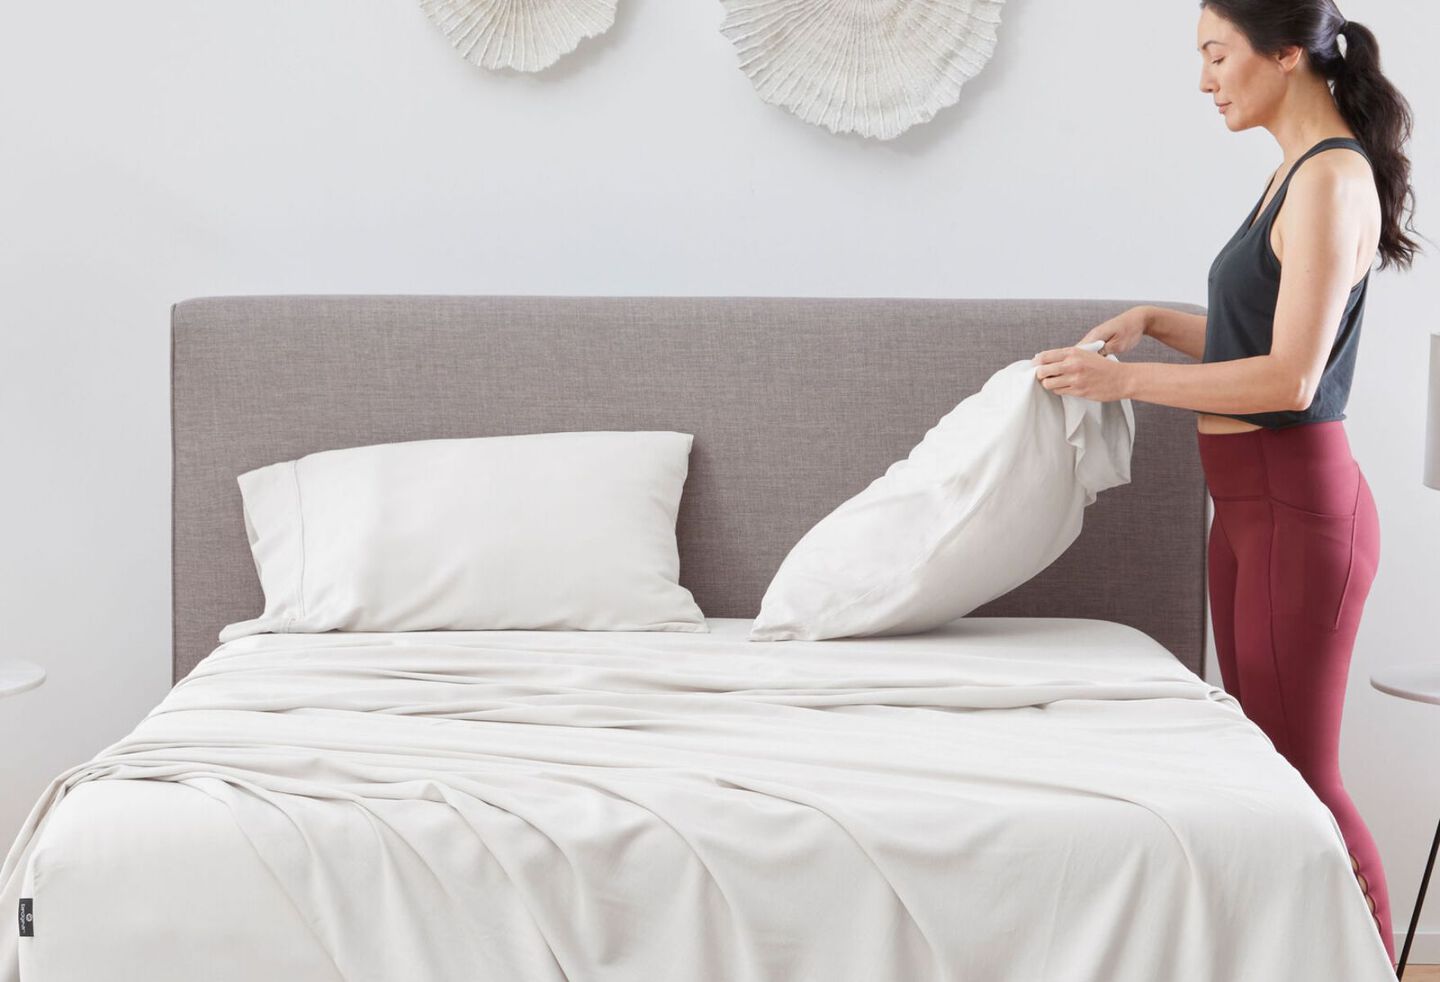 Woman putting a pillow in a pillowcase onto a bed with white sheets